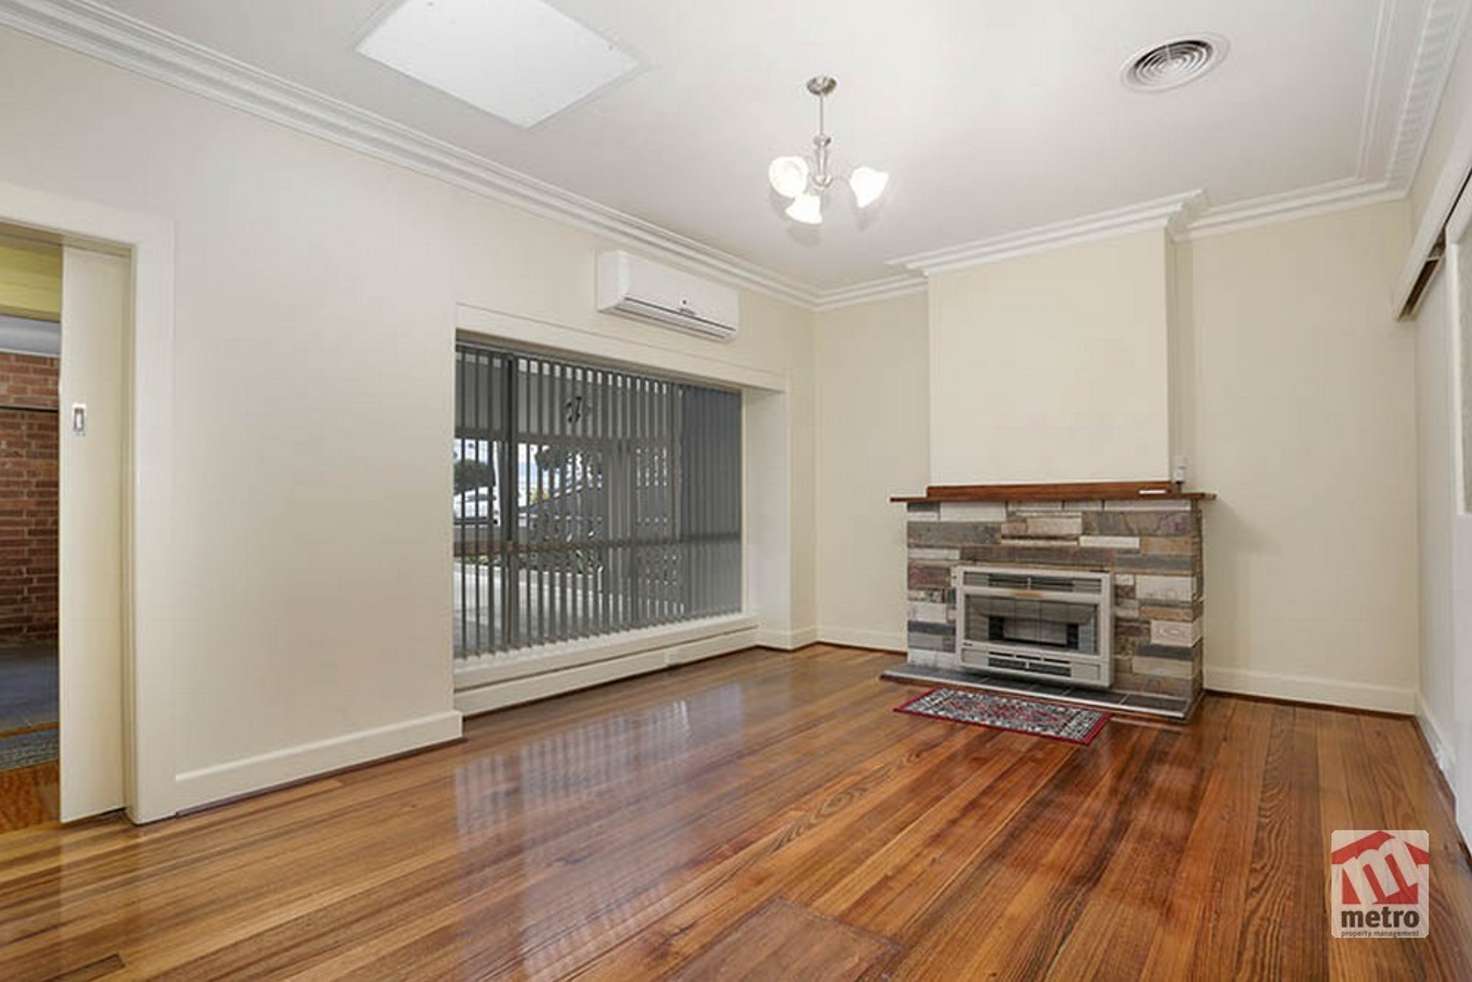 Main view of Homely house listing, 1423 Dandenong Road, Chadstone VIC 3148